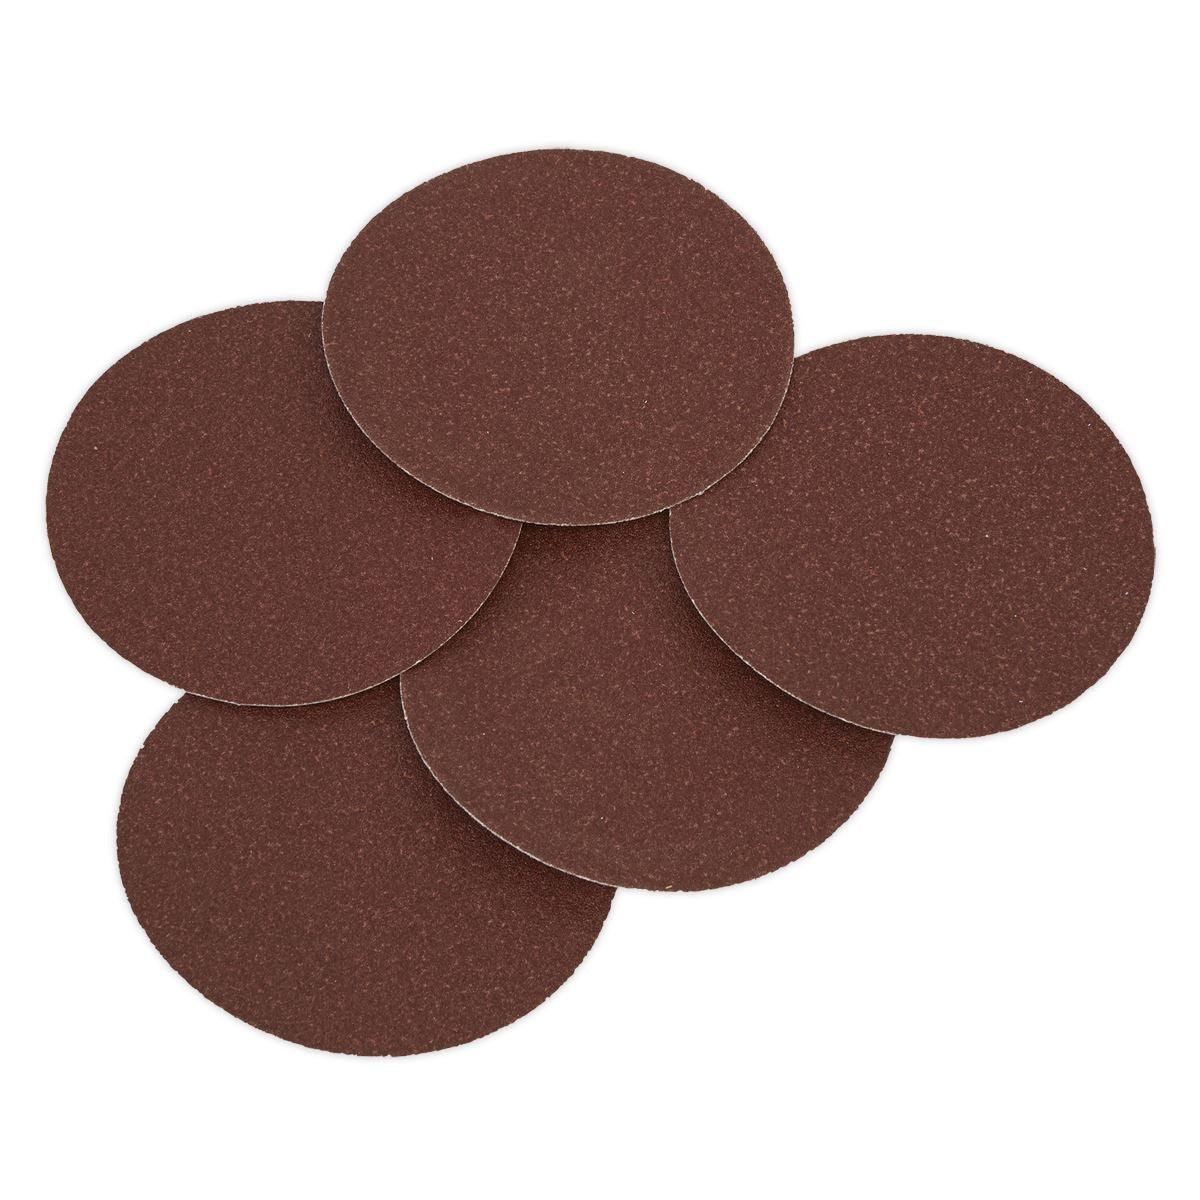 Sealey Sanding Disc 125mm 80Grit Adhesive Backed Pack of 5 SSD01